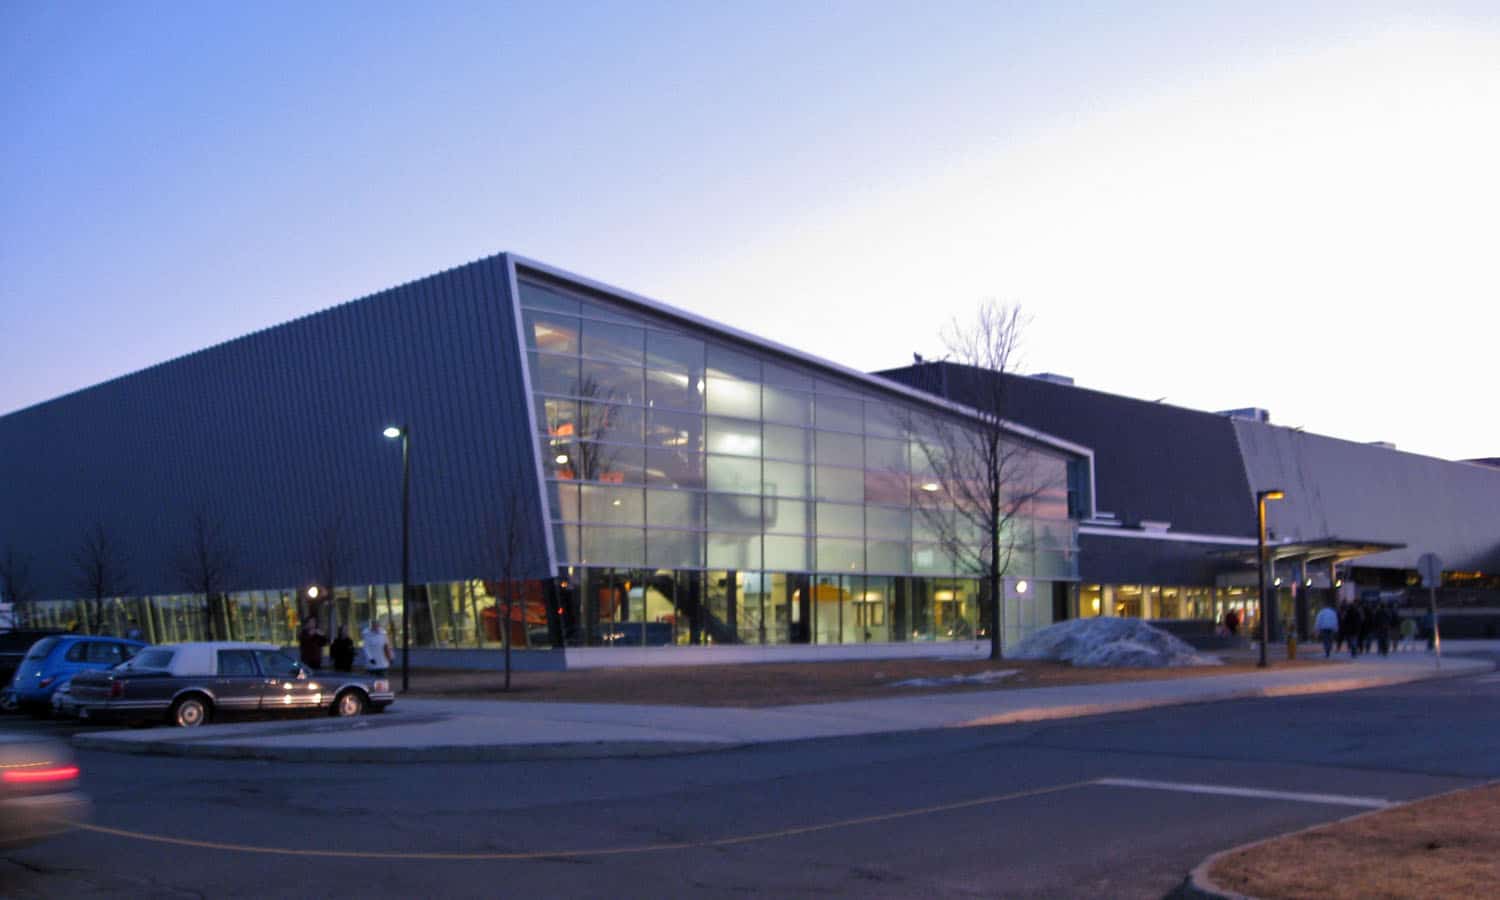 A new aquatic centre was added to the east end of the Civic Complex